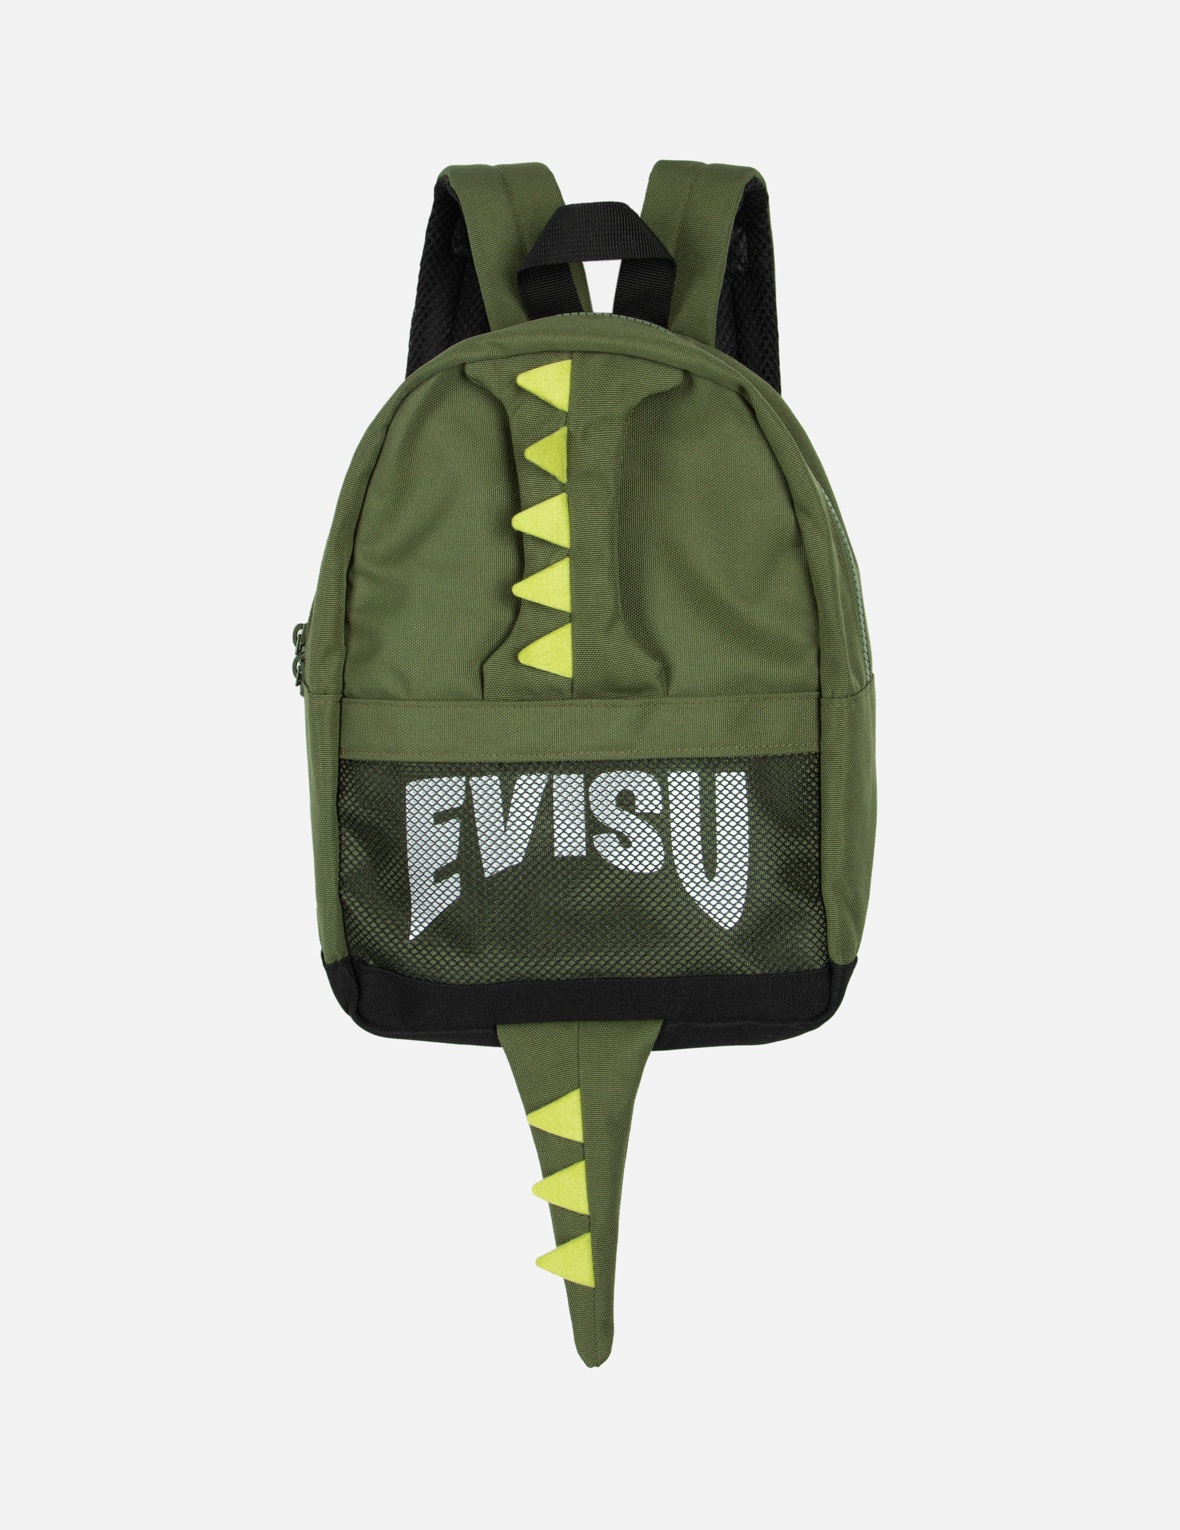 3D SPIKES AND TAIL DINOSAUR BACKPACK - 1